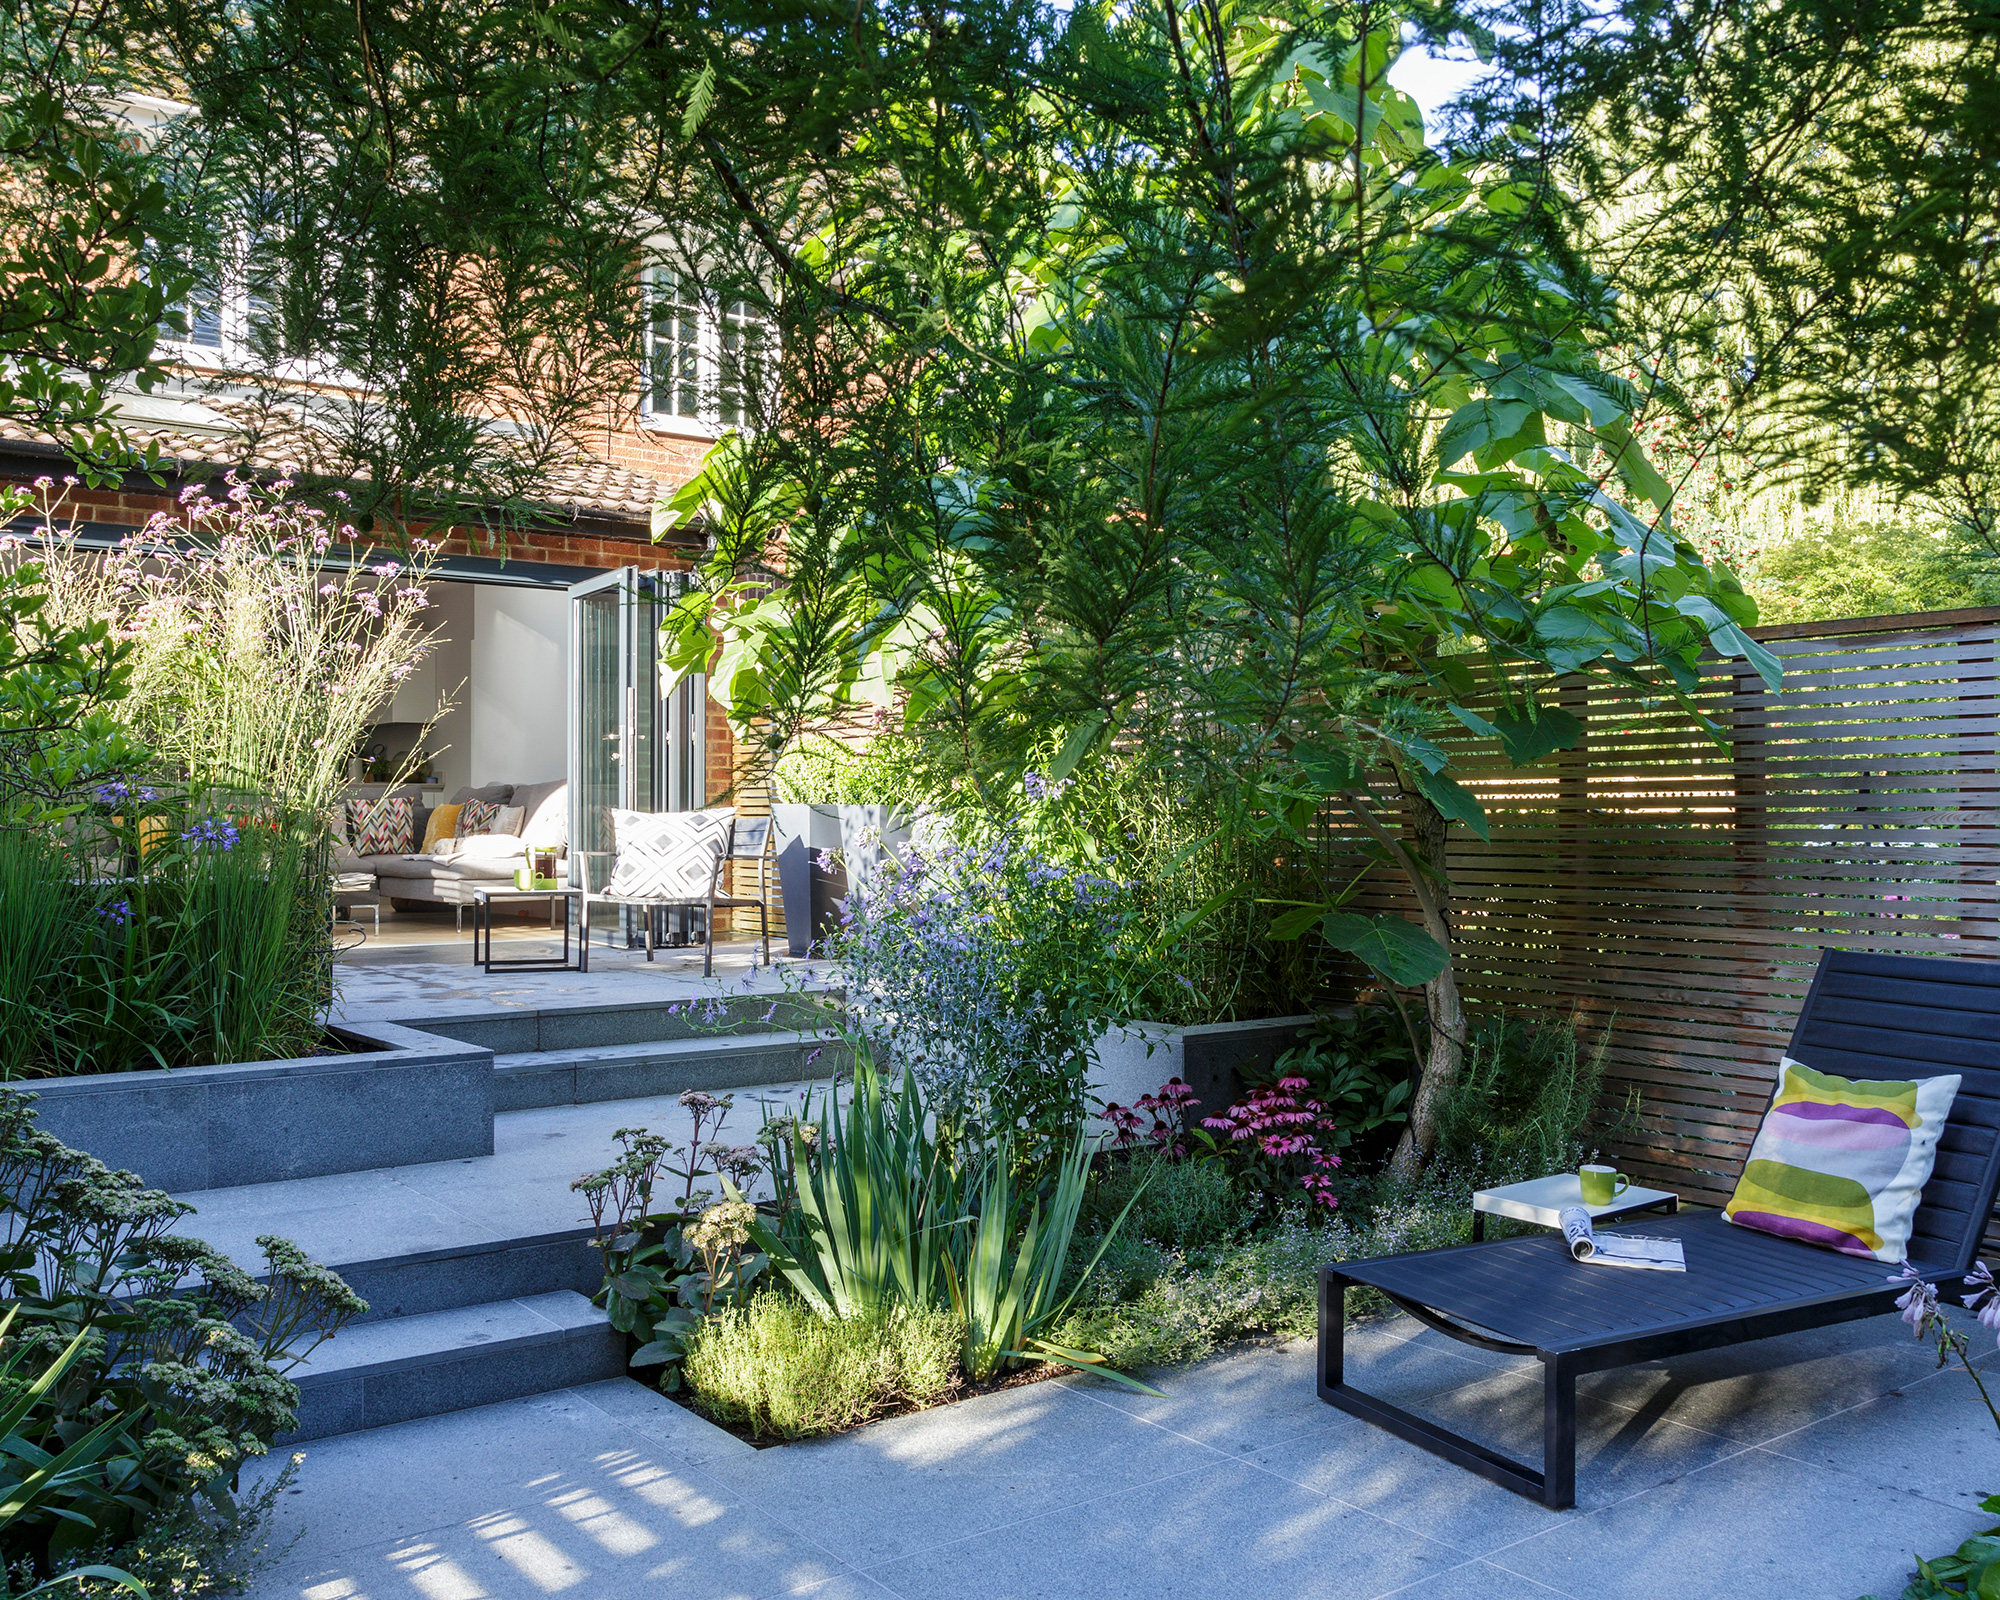 How to plan a small garden Make the most of a tiny outdoor space  